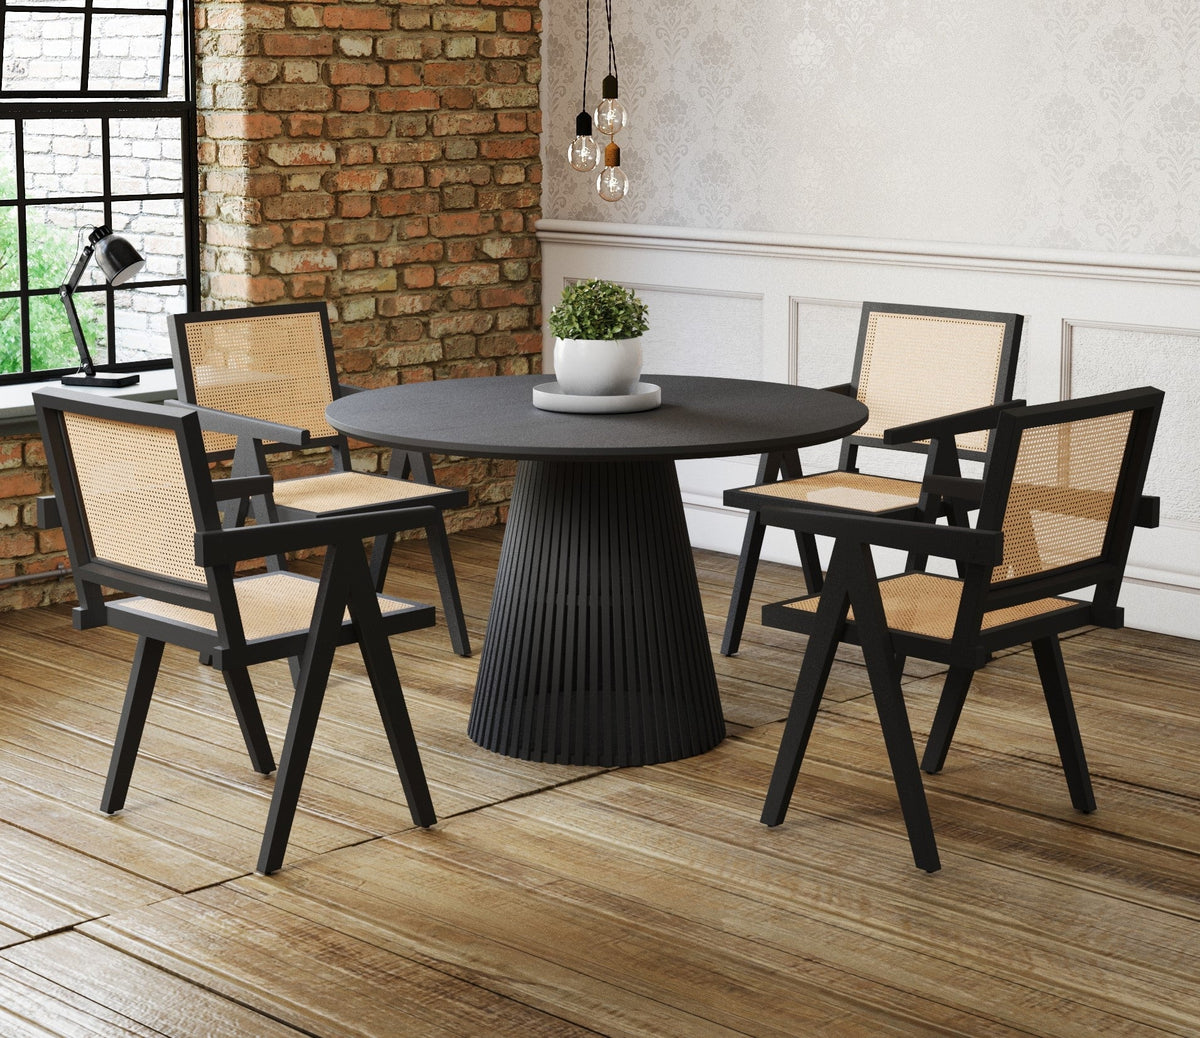 Round Flute Wood Dining Table &amp; 4 x Pierre Jeanneret Chairs Set - Black Acacia Wood Casa Maria Designs 